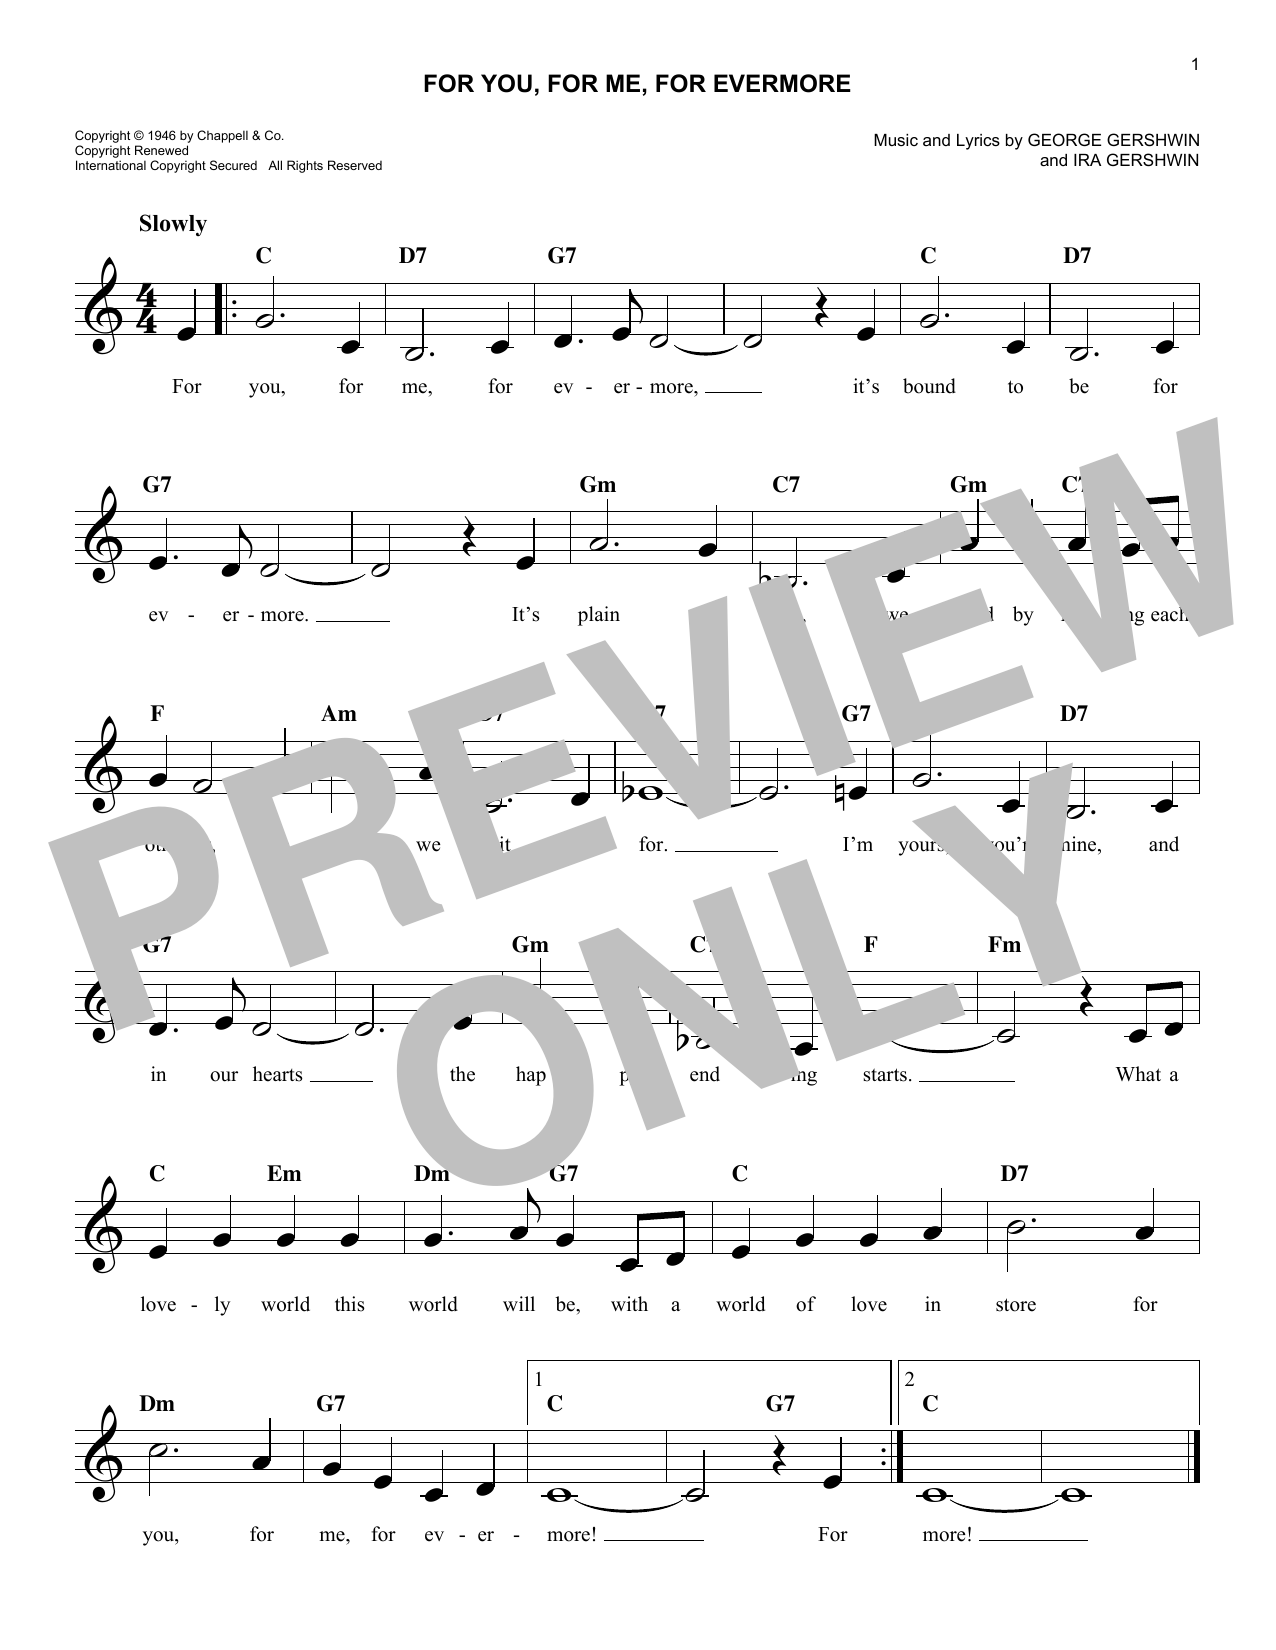 Download George Gershwin For You, For Me For Evermore Sheet Music